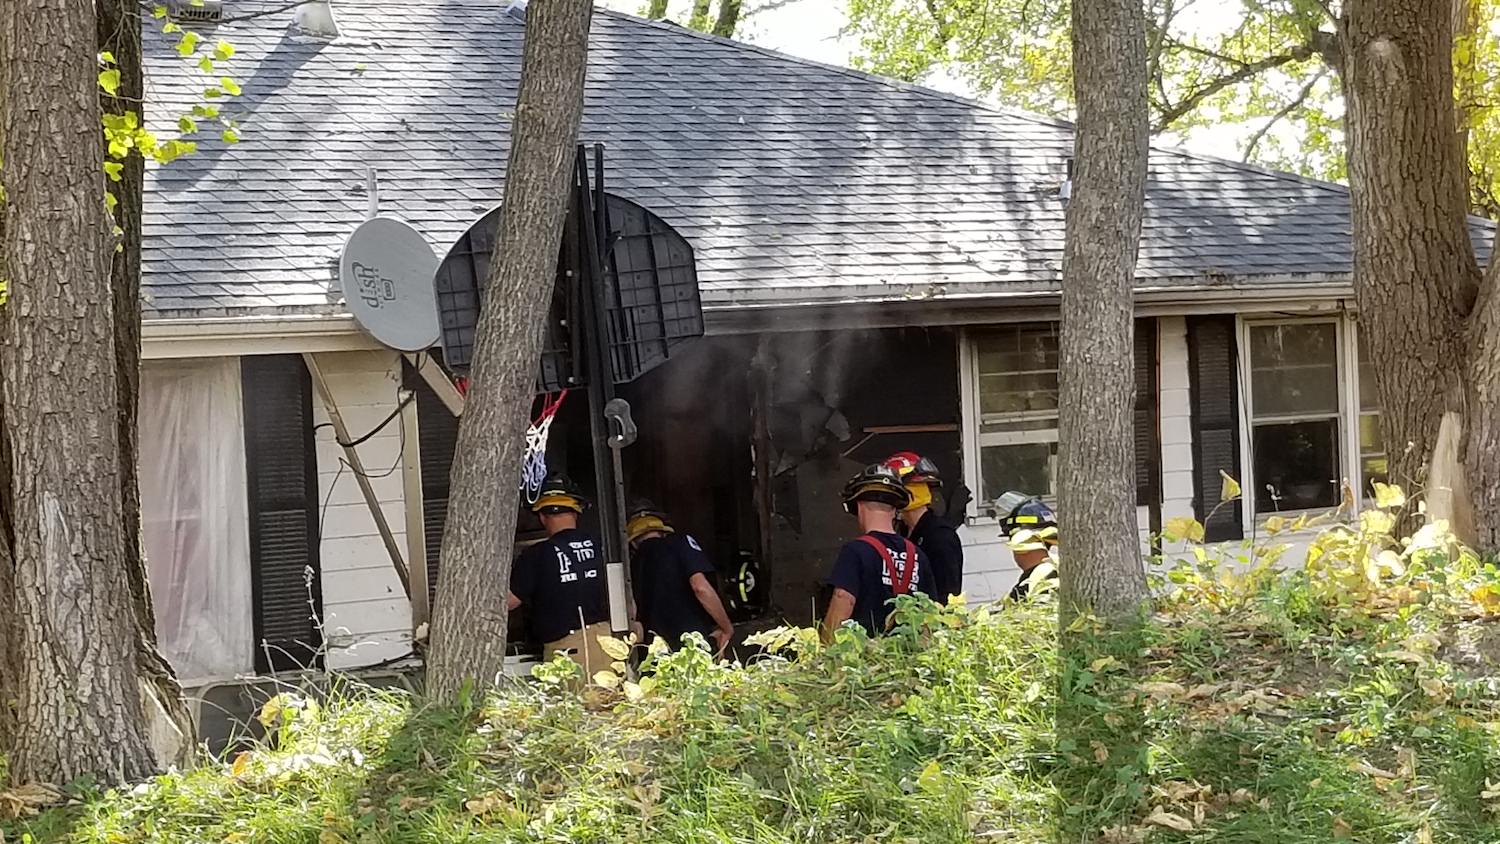 Clothes dryer causes fire at 2005 West 14th in Sioux City Fire Department says